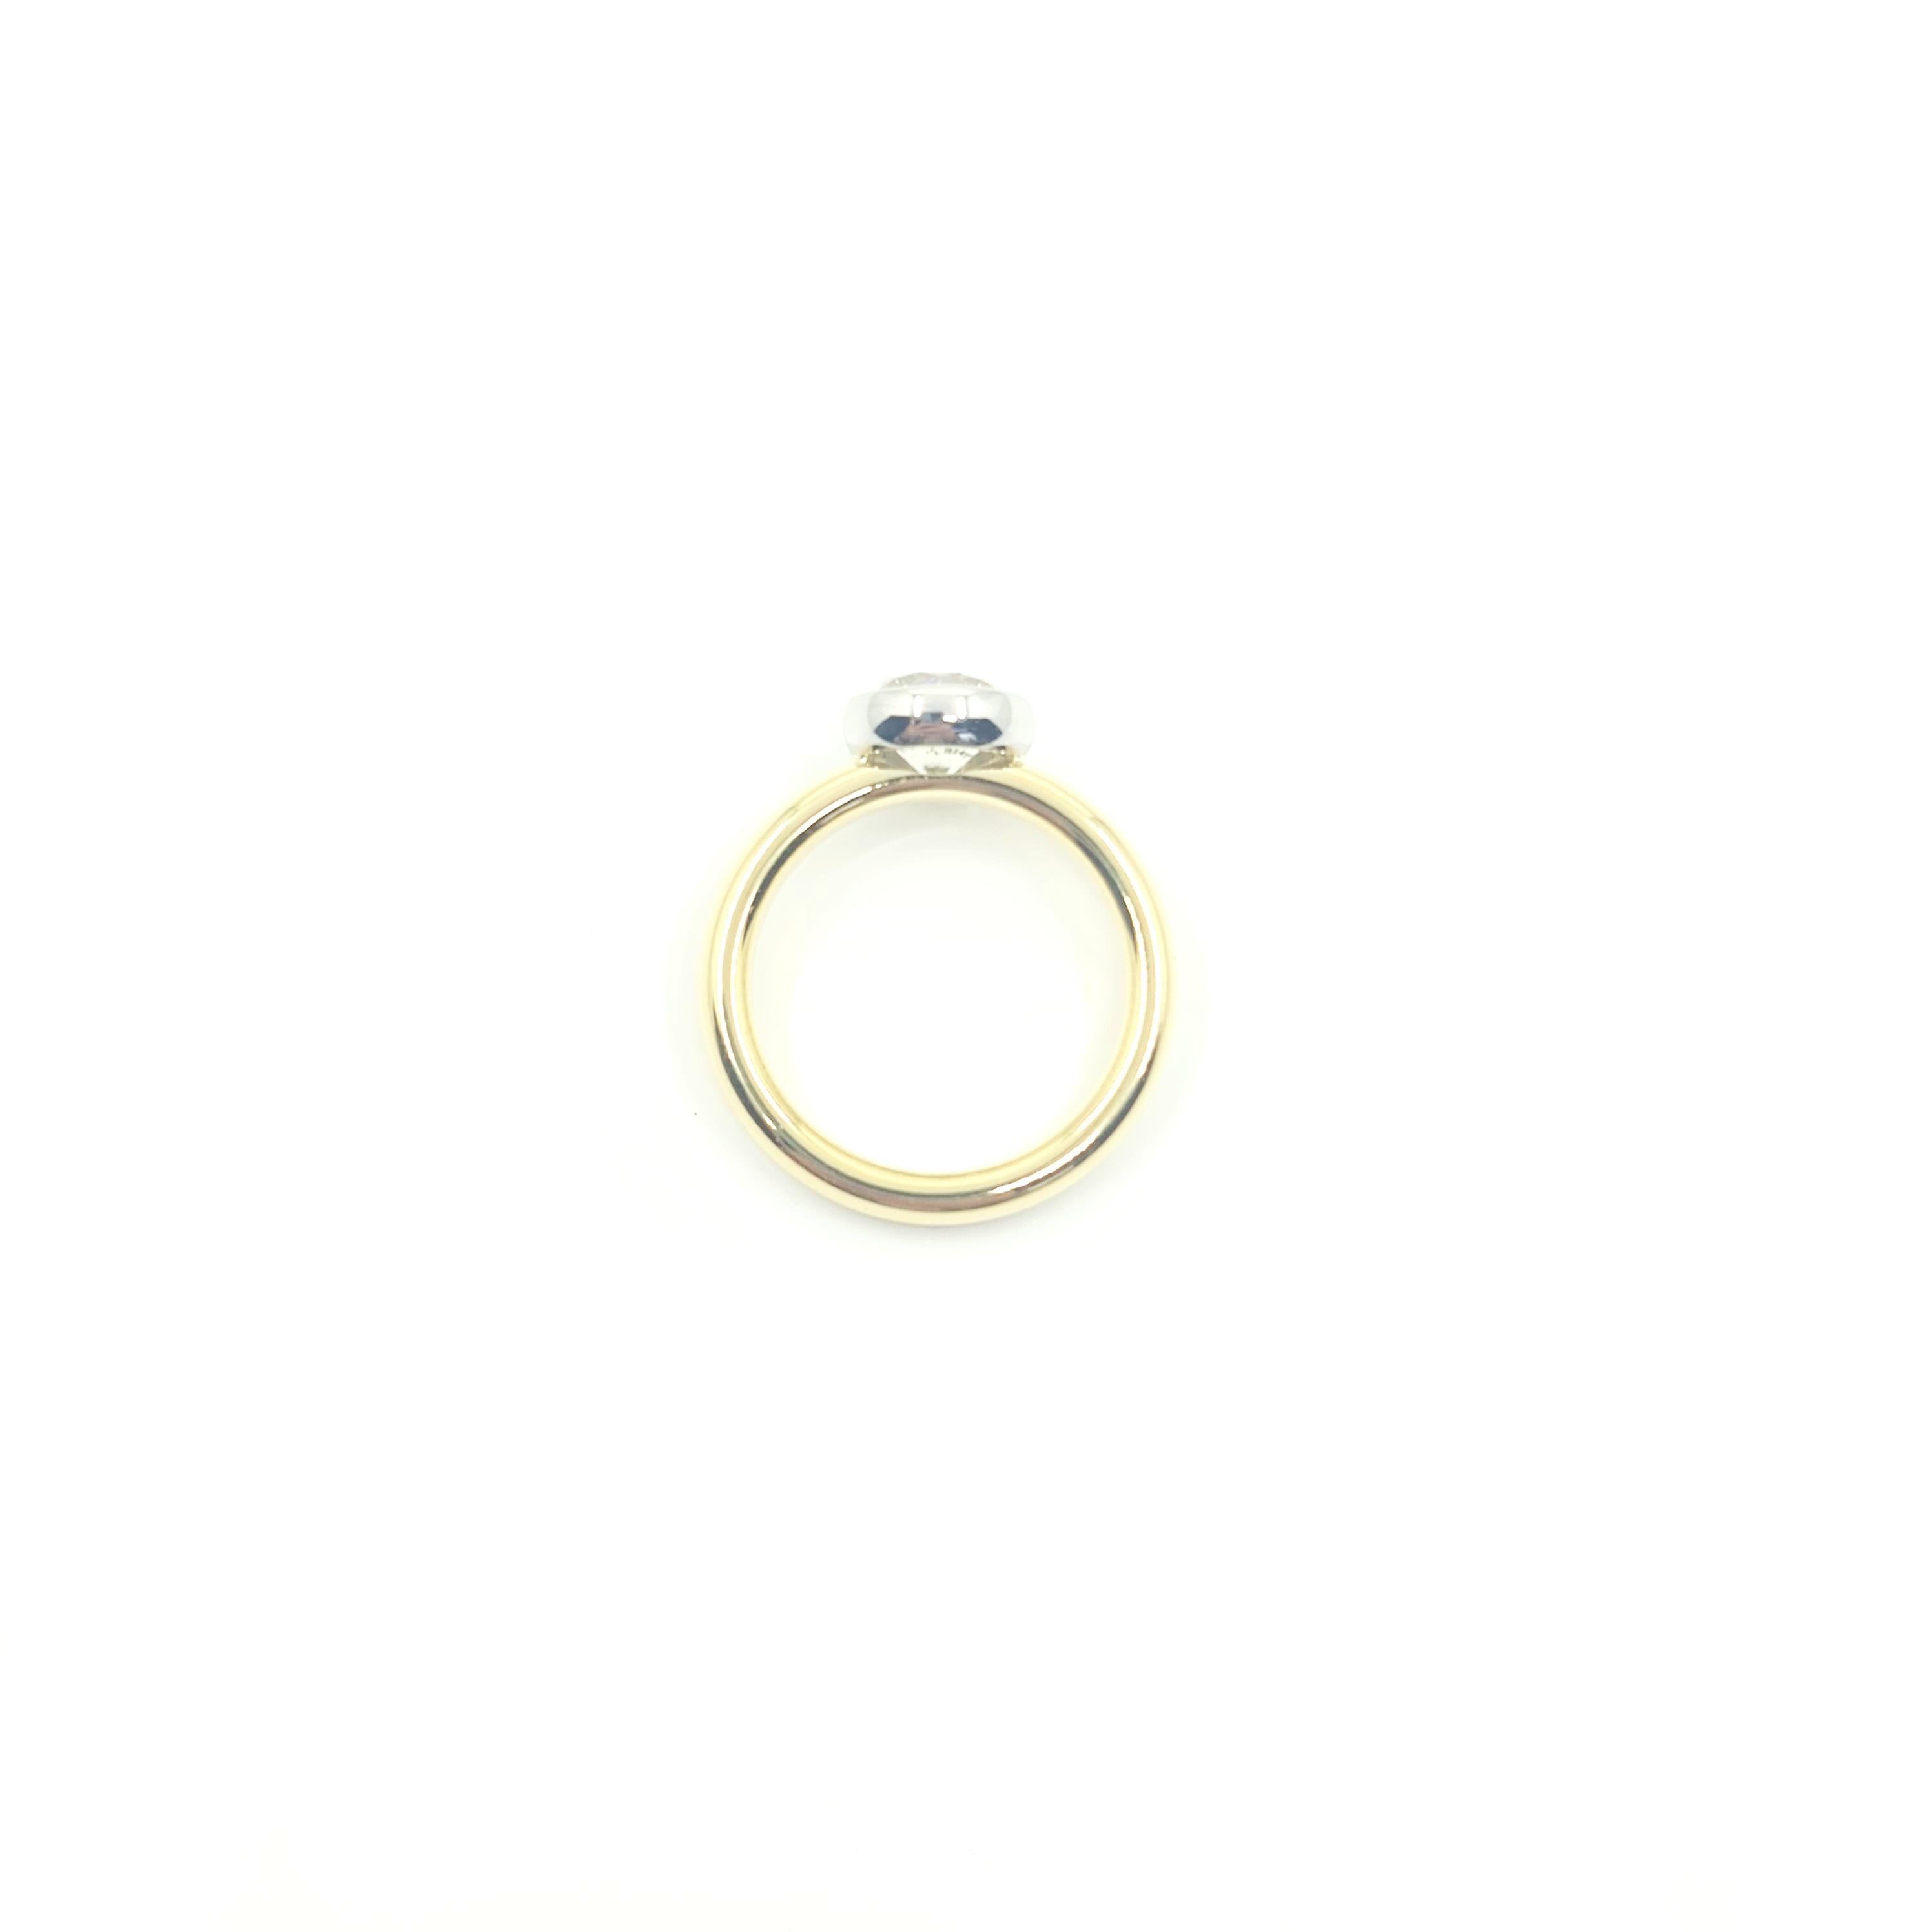 HRD Certified Solitaire Ring with 2.02Ct J-K/I(P) 18K Gold 5